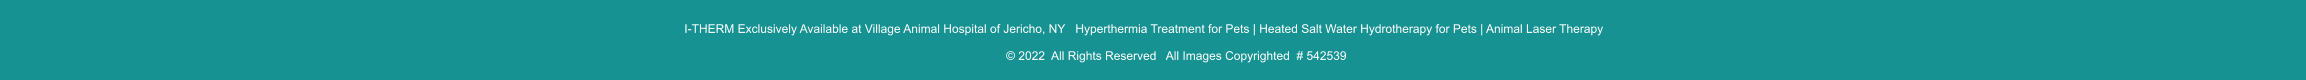 I-THERM Exclusively Available at Village Animal Hospital of Jericho, NY   Hyperthermia Treatment for Pets | Heated Salt Water Hydrotherapy for Pets | Animal Laser Therapy     © 2022  All Rights Reserved   All Images Copyrighted  # 542539